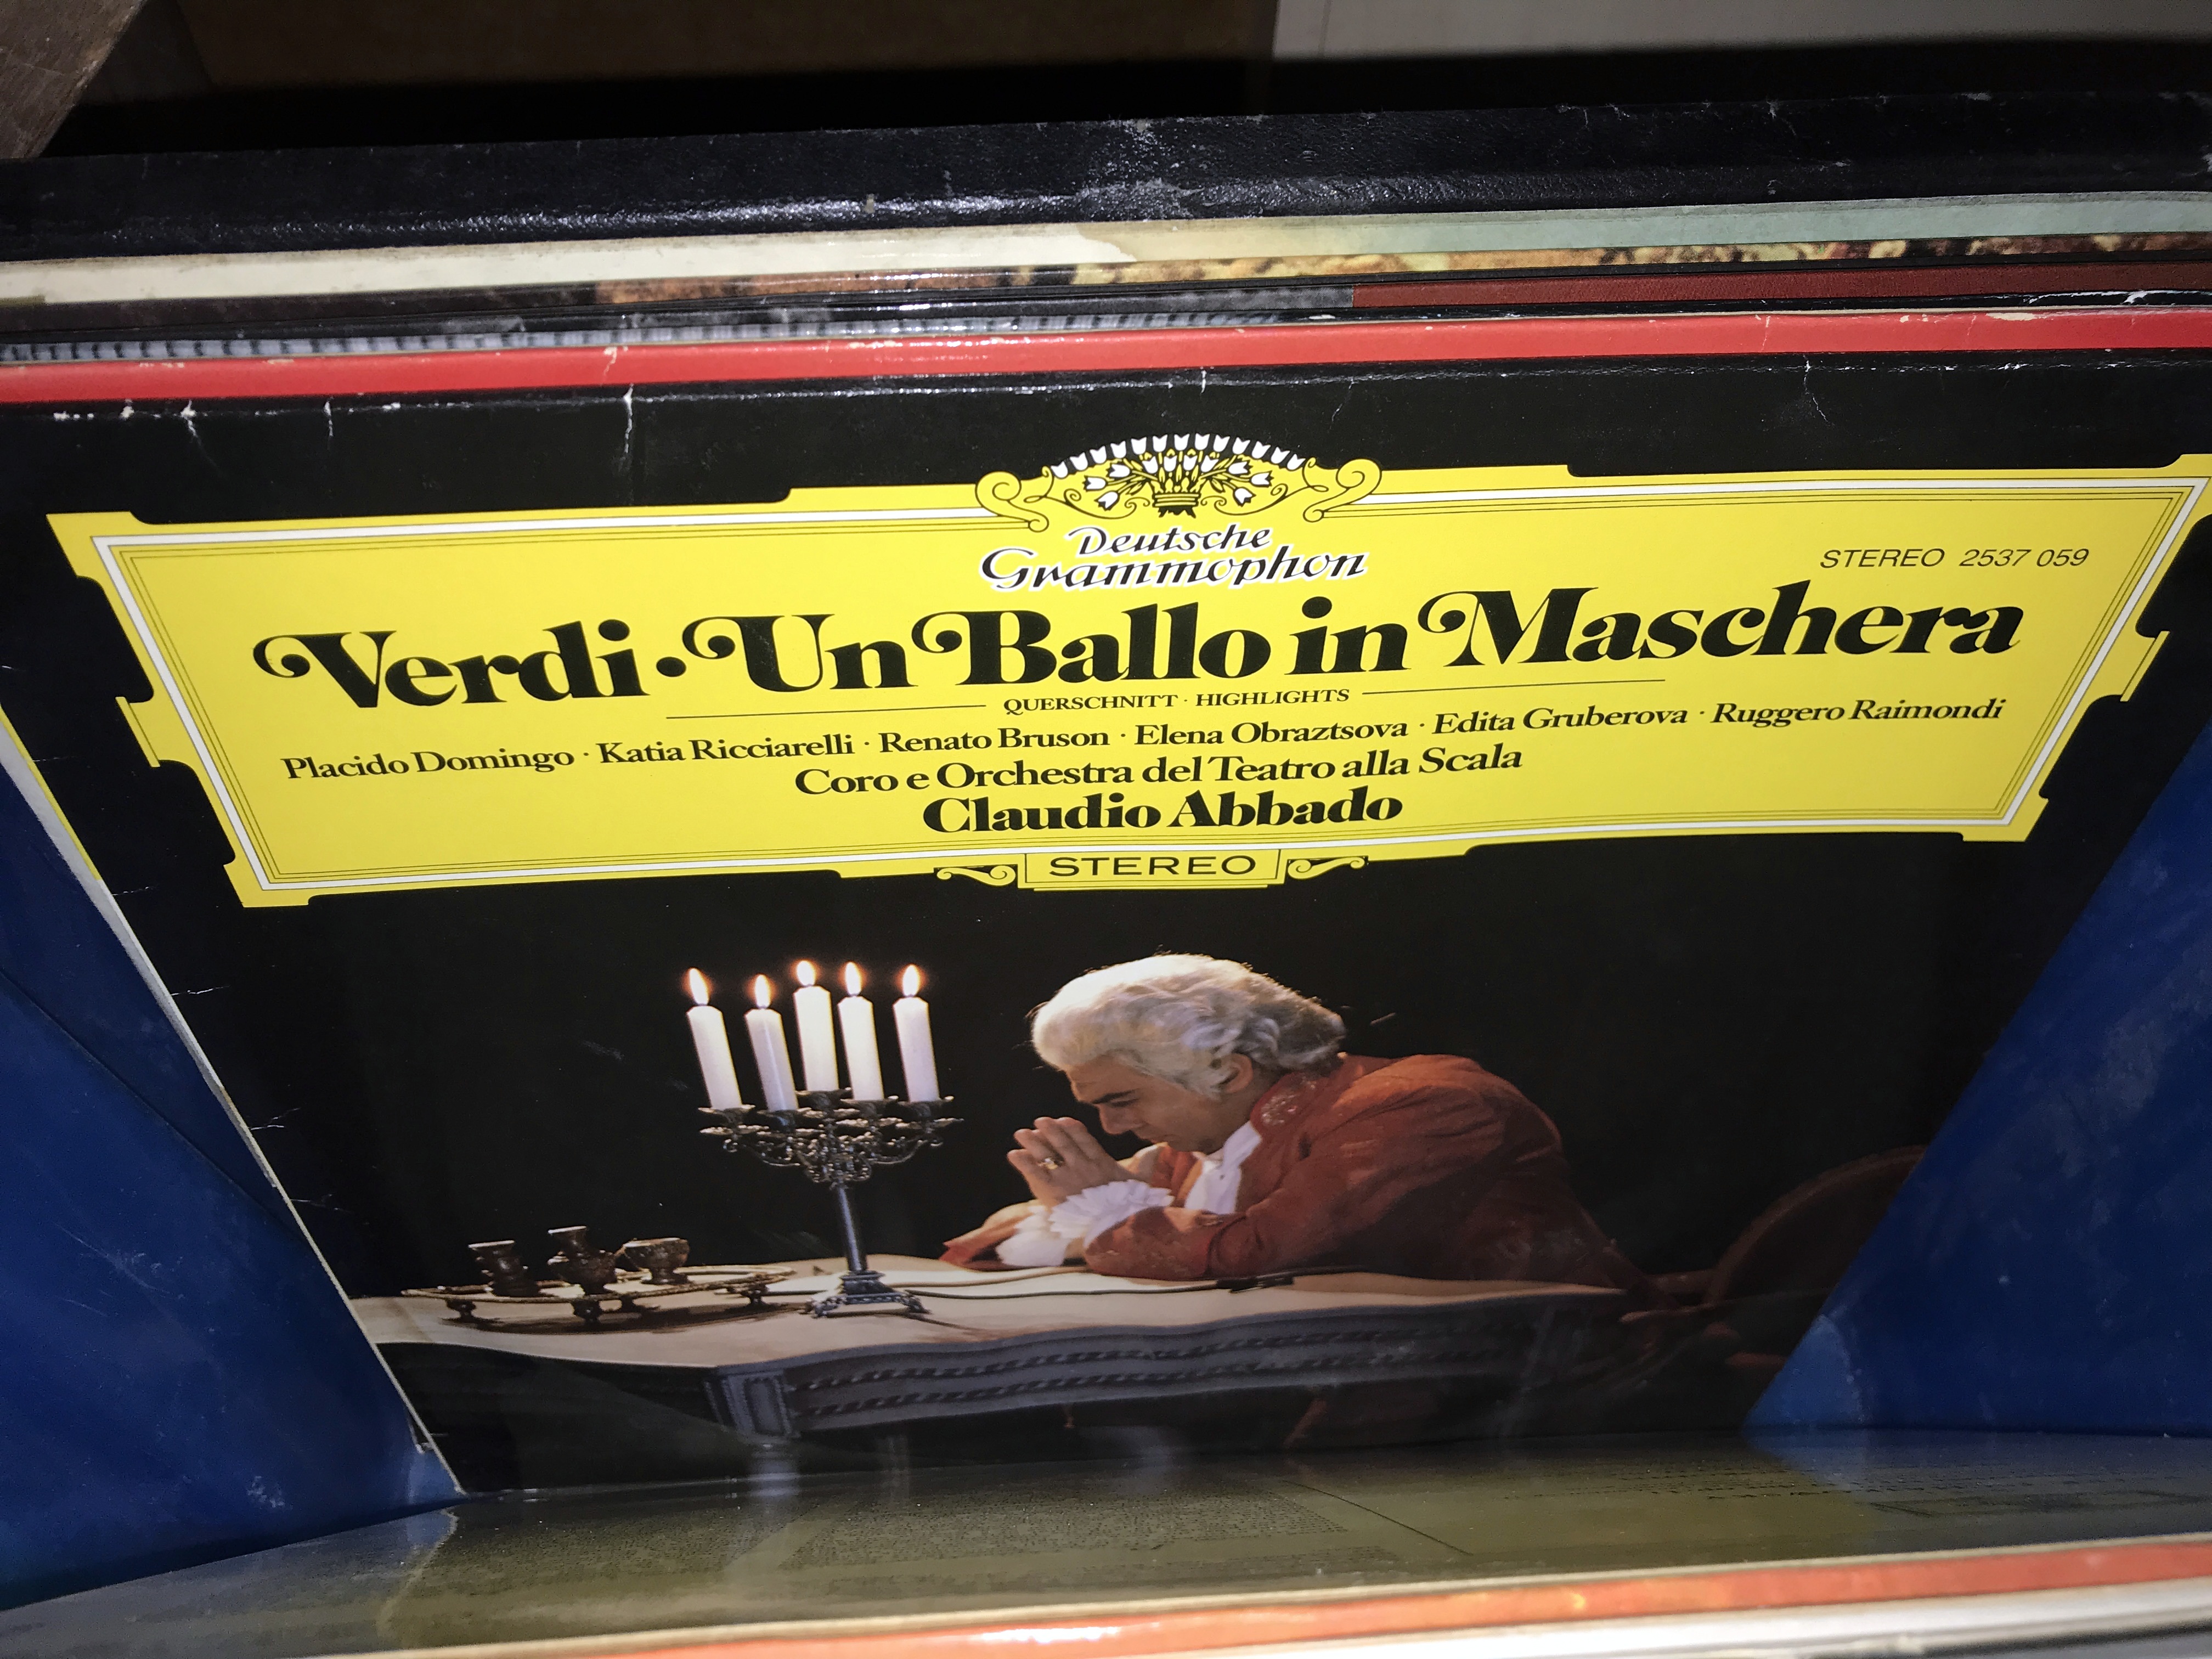 Over 150 classical LP records includes sxl wide band, asds, - Image 19 of 19